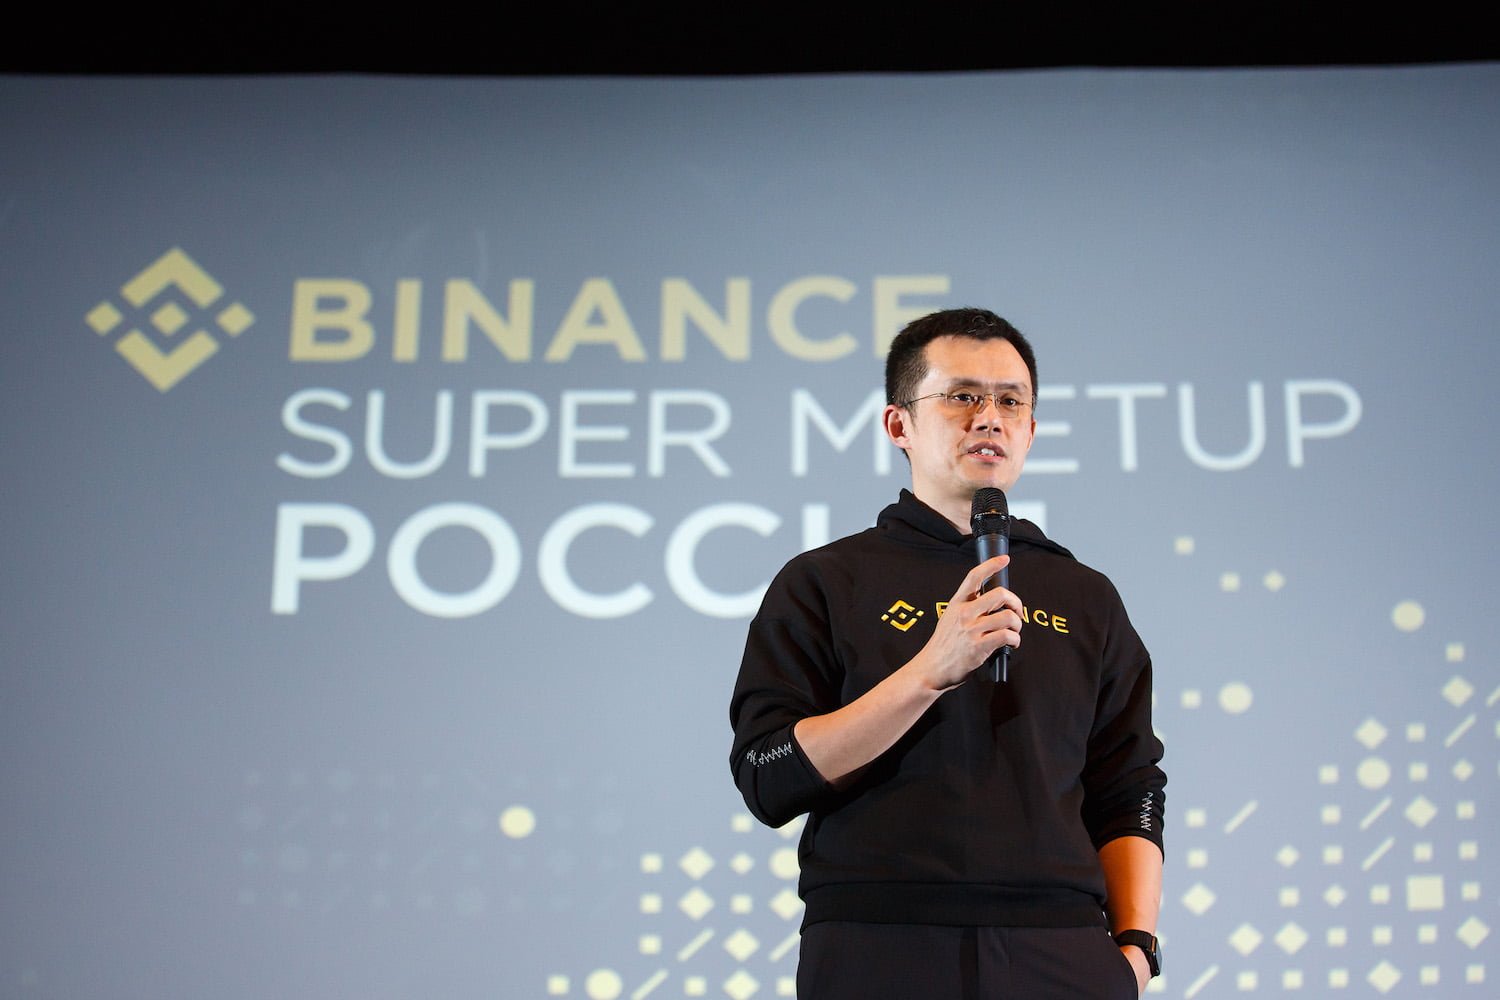 Binance CEO indirectly suggests not buying new meme coins 10